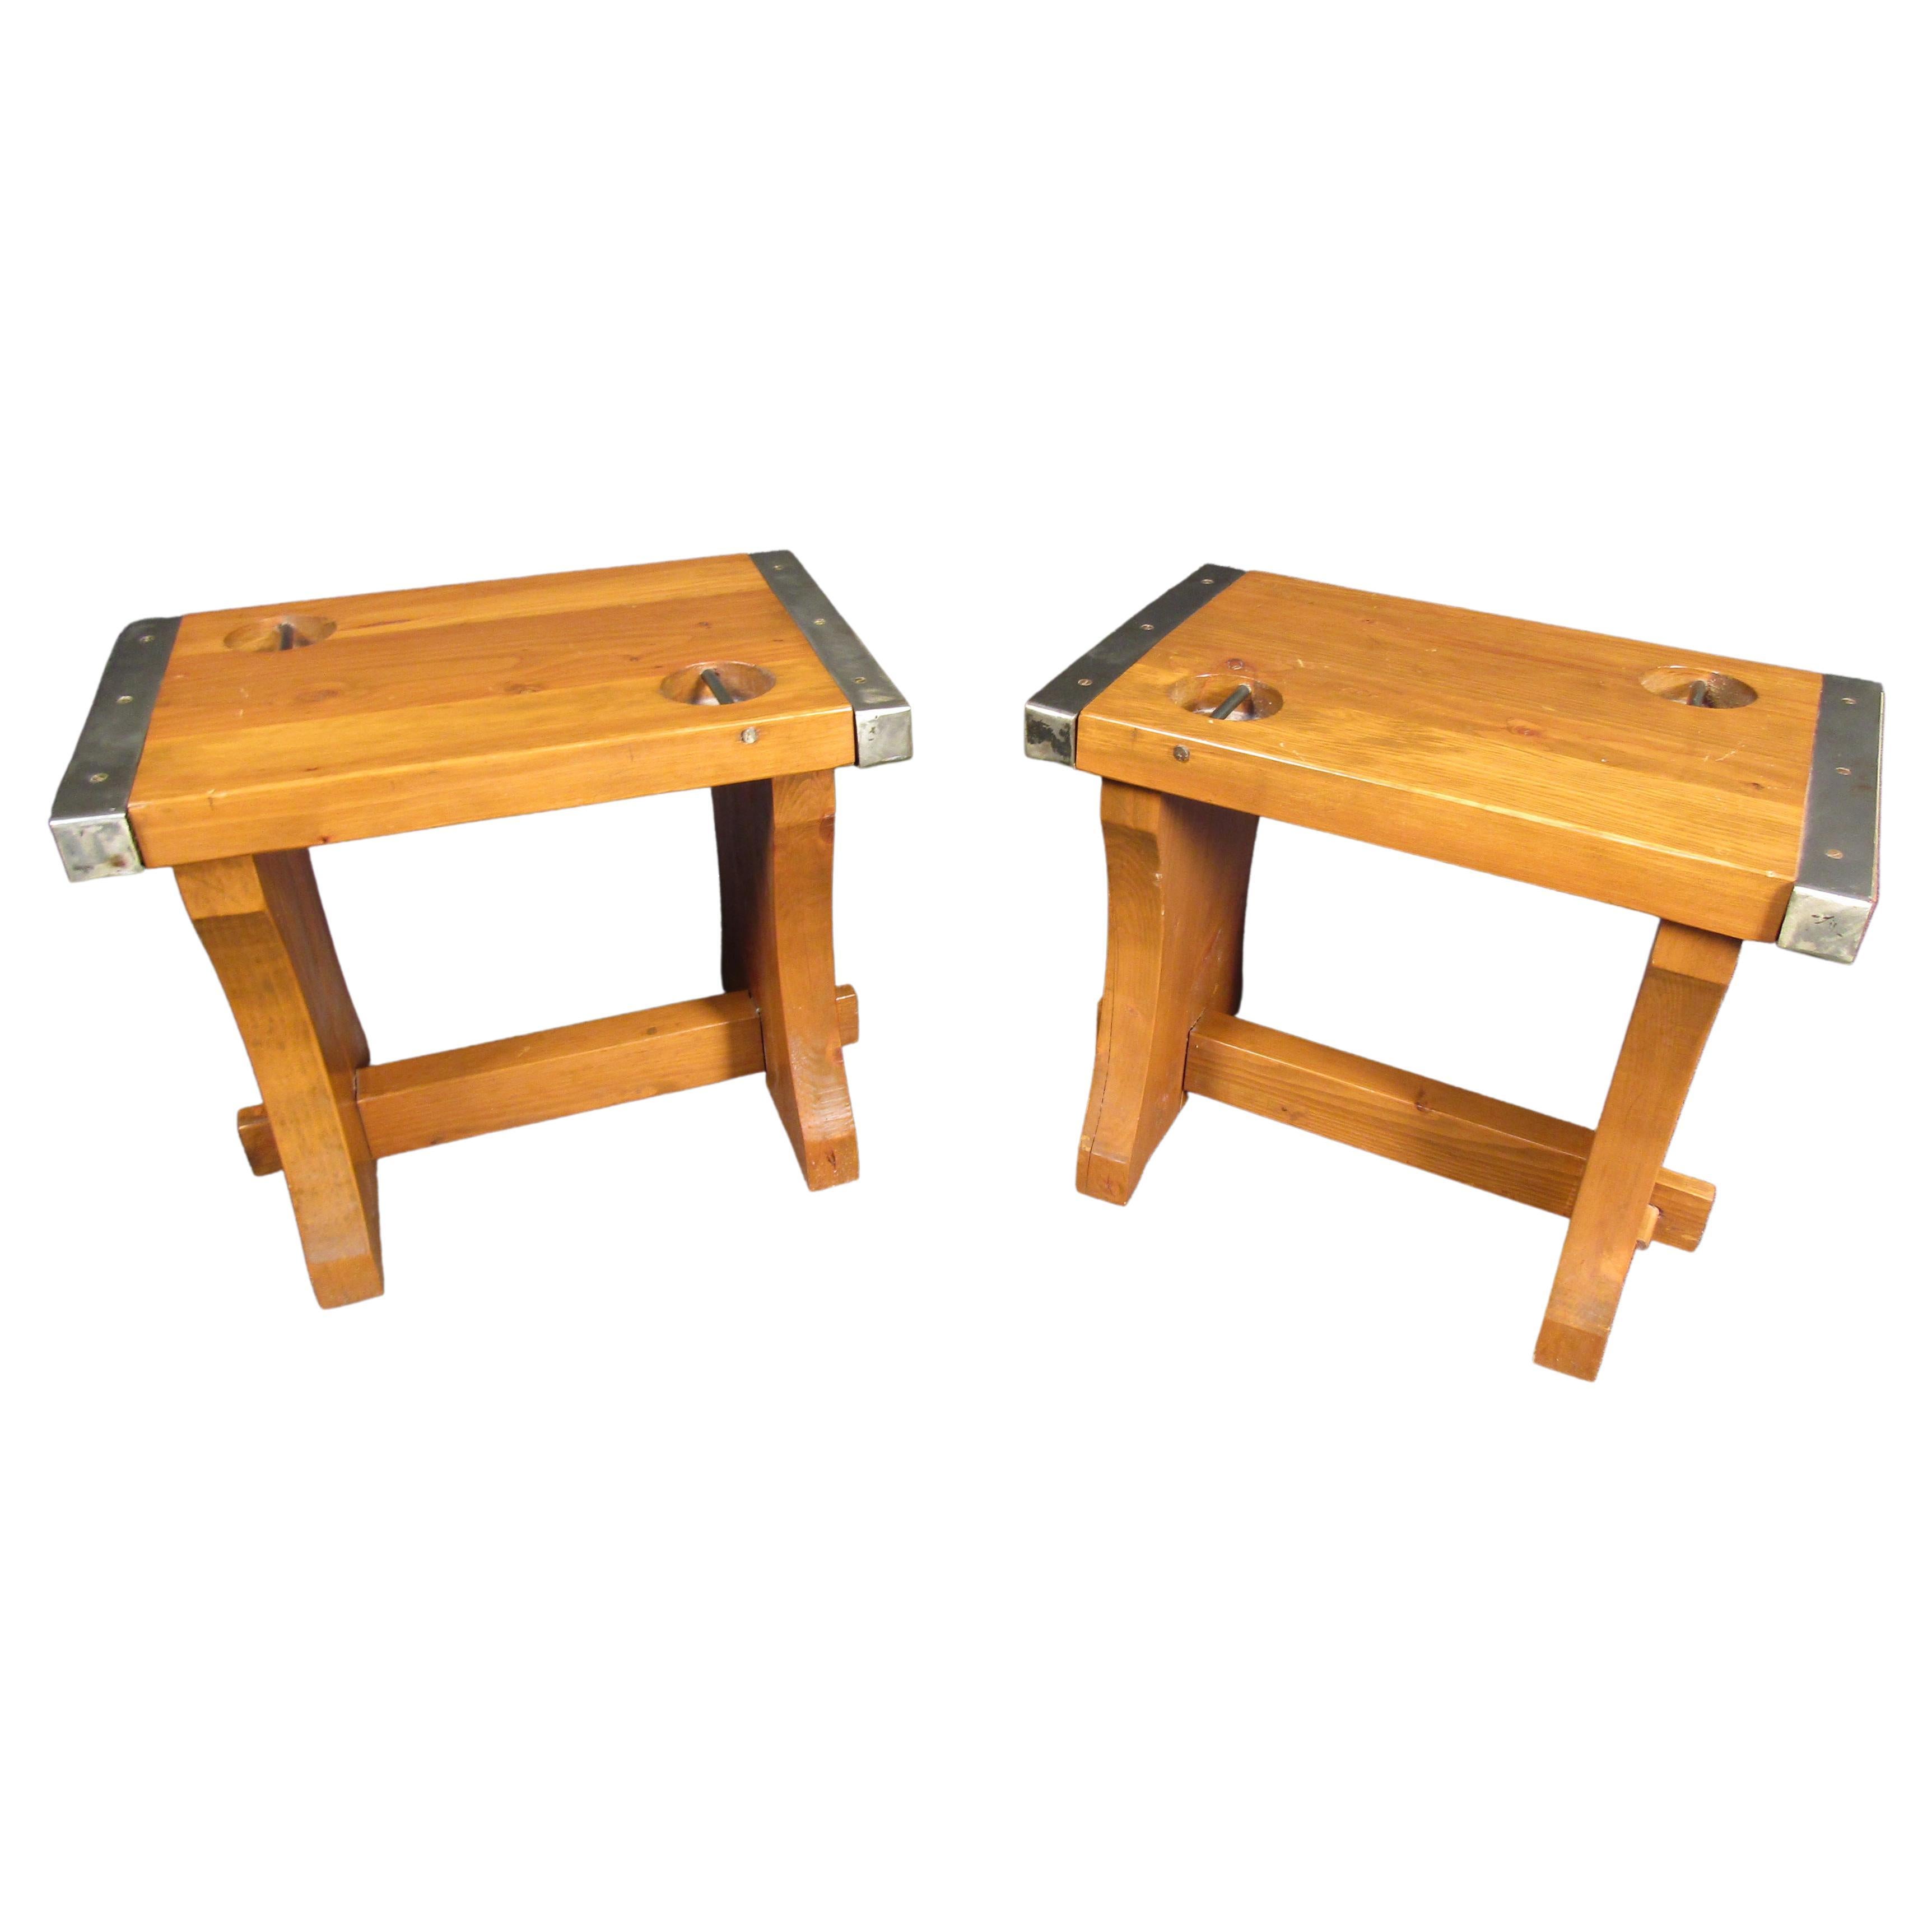 Pair of Rustic Oak Tables For Sale